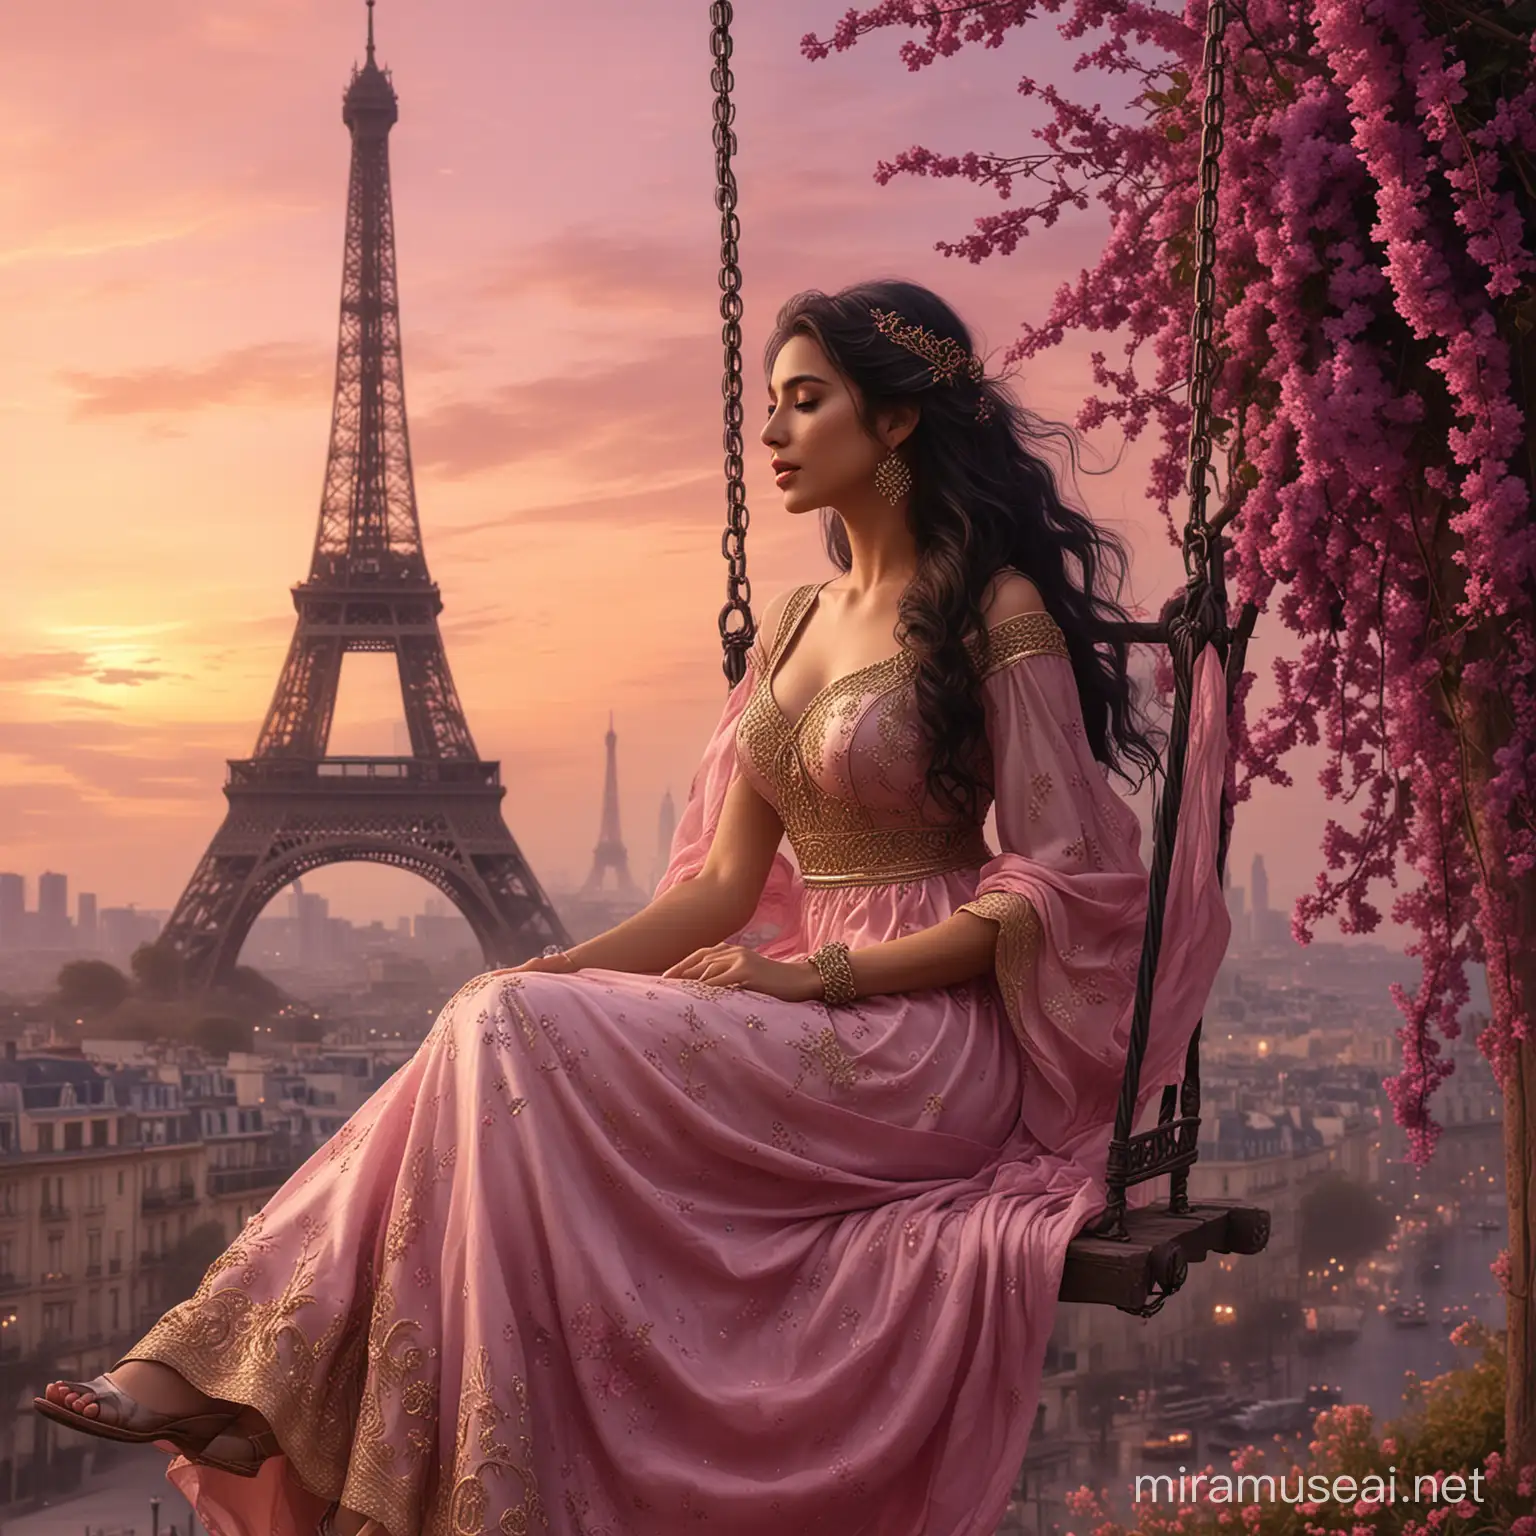 A beautiful woman, from profile, with highly detailed dress, sitting on a swing in a cloudy dark pink sky, surrounded by dark purple flowers. Long black wavy hair, long elegant beige dress, sari dress. Background golden vapor. Background golden tower effel. Focus gokden tower eiffel. Dust on the ground. 8k, fantasy, illustration, digital art, illustration art, fantasy art, fantasy style